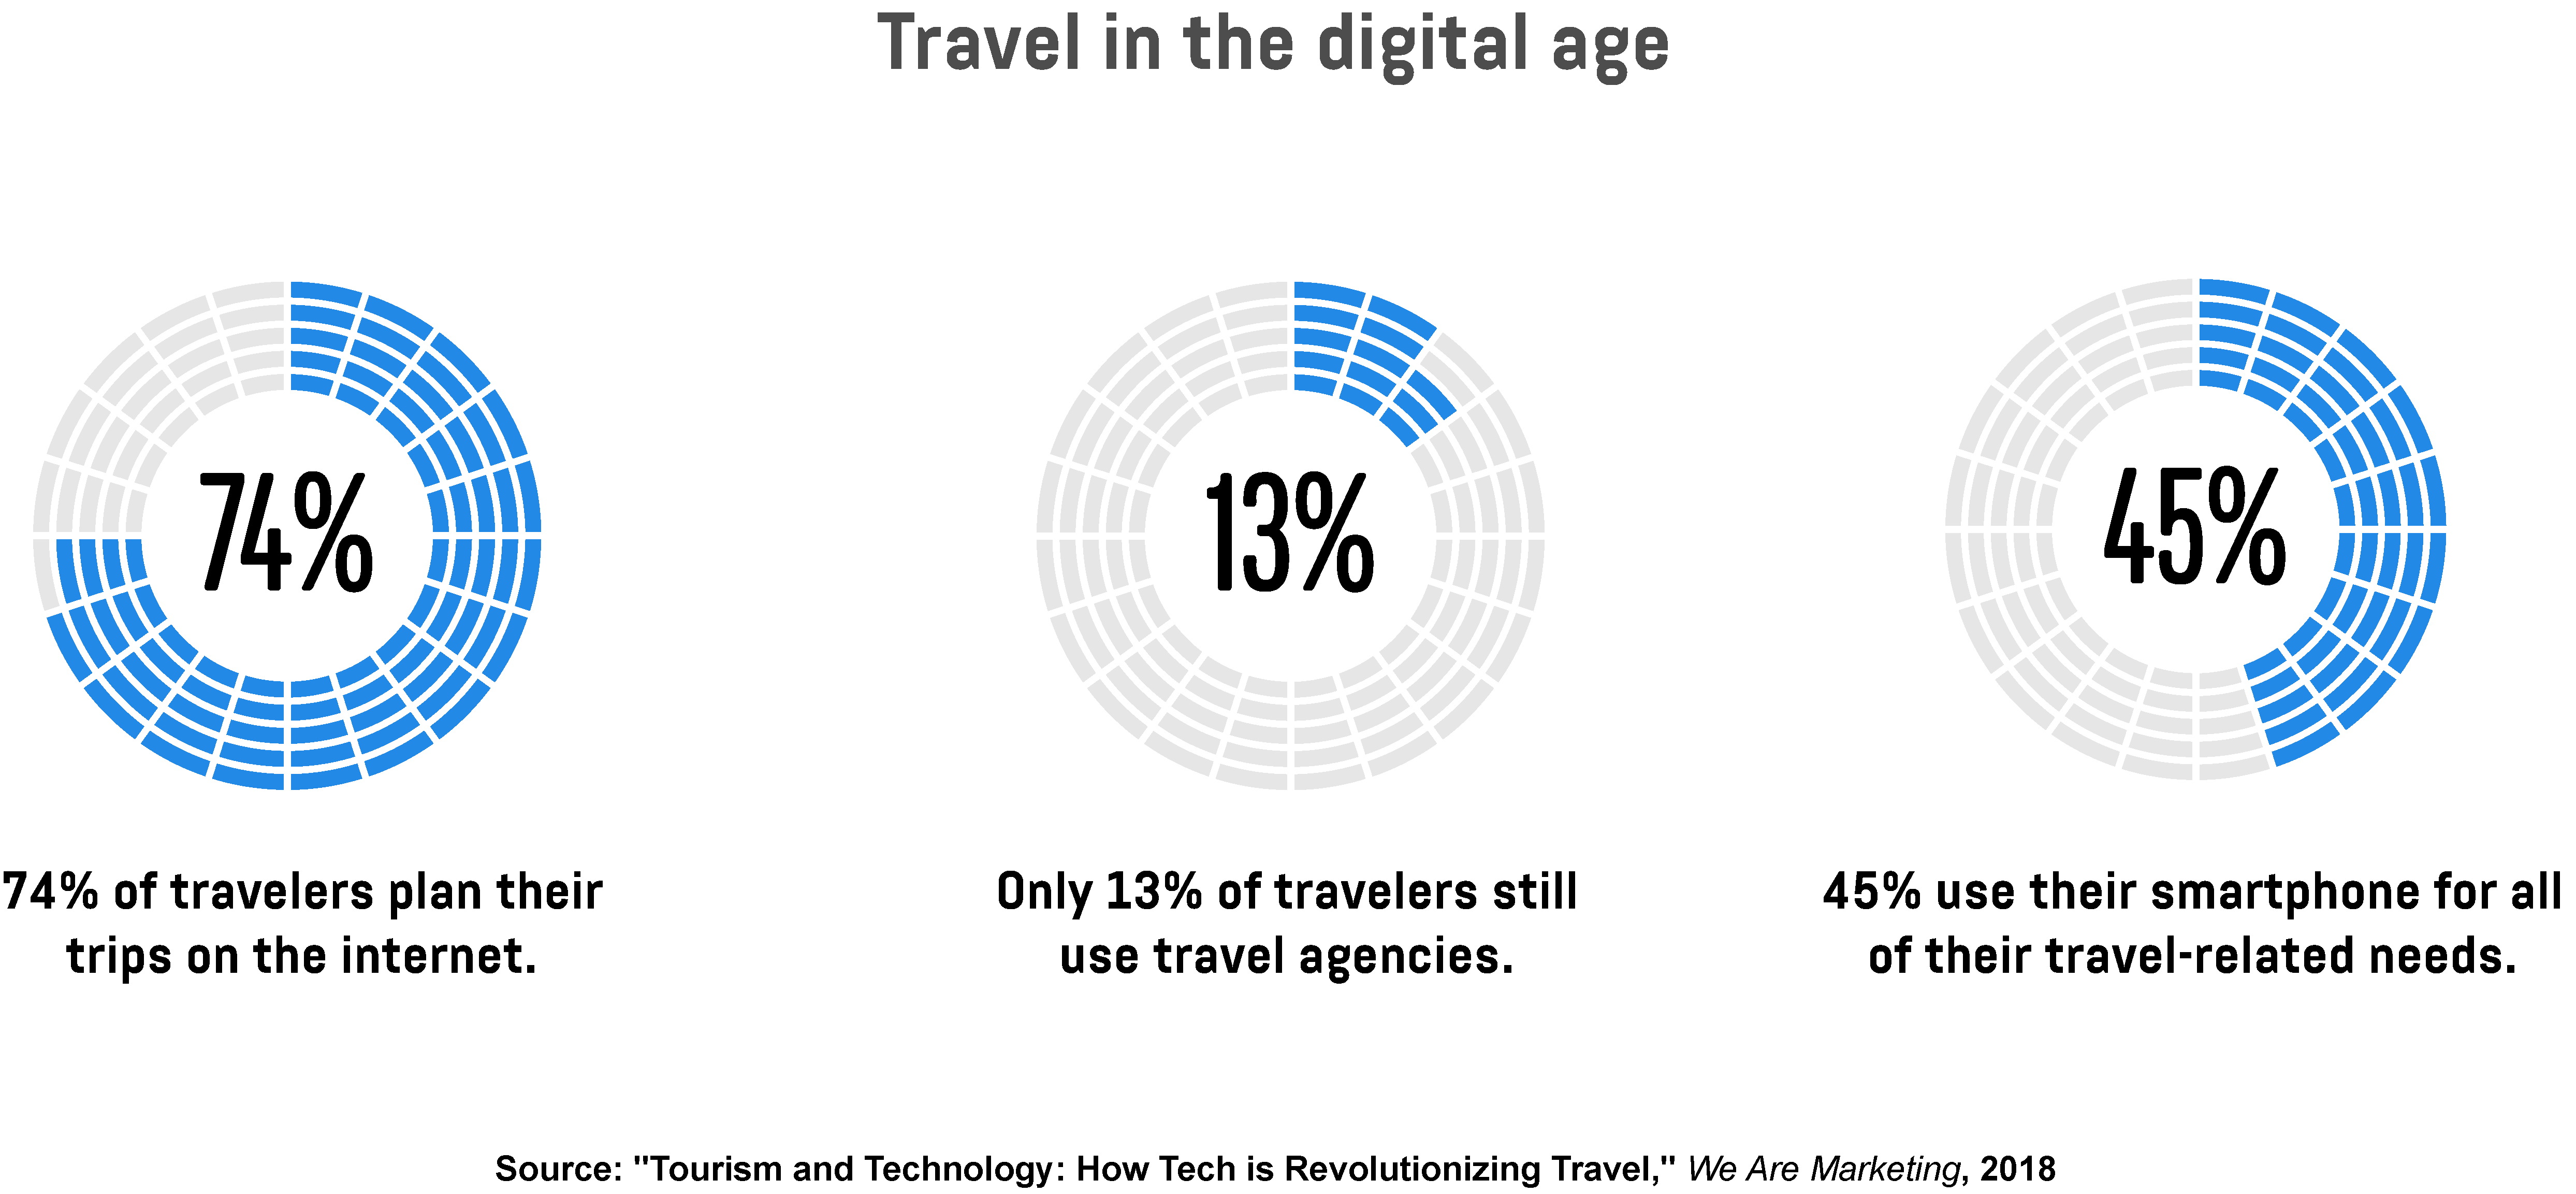  An infographic showing the percentage of travelers that plan their trips on the internet as well as how many of them use travel agencies and smartphones for travel-related needs. 